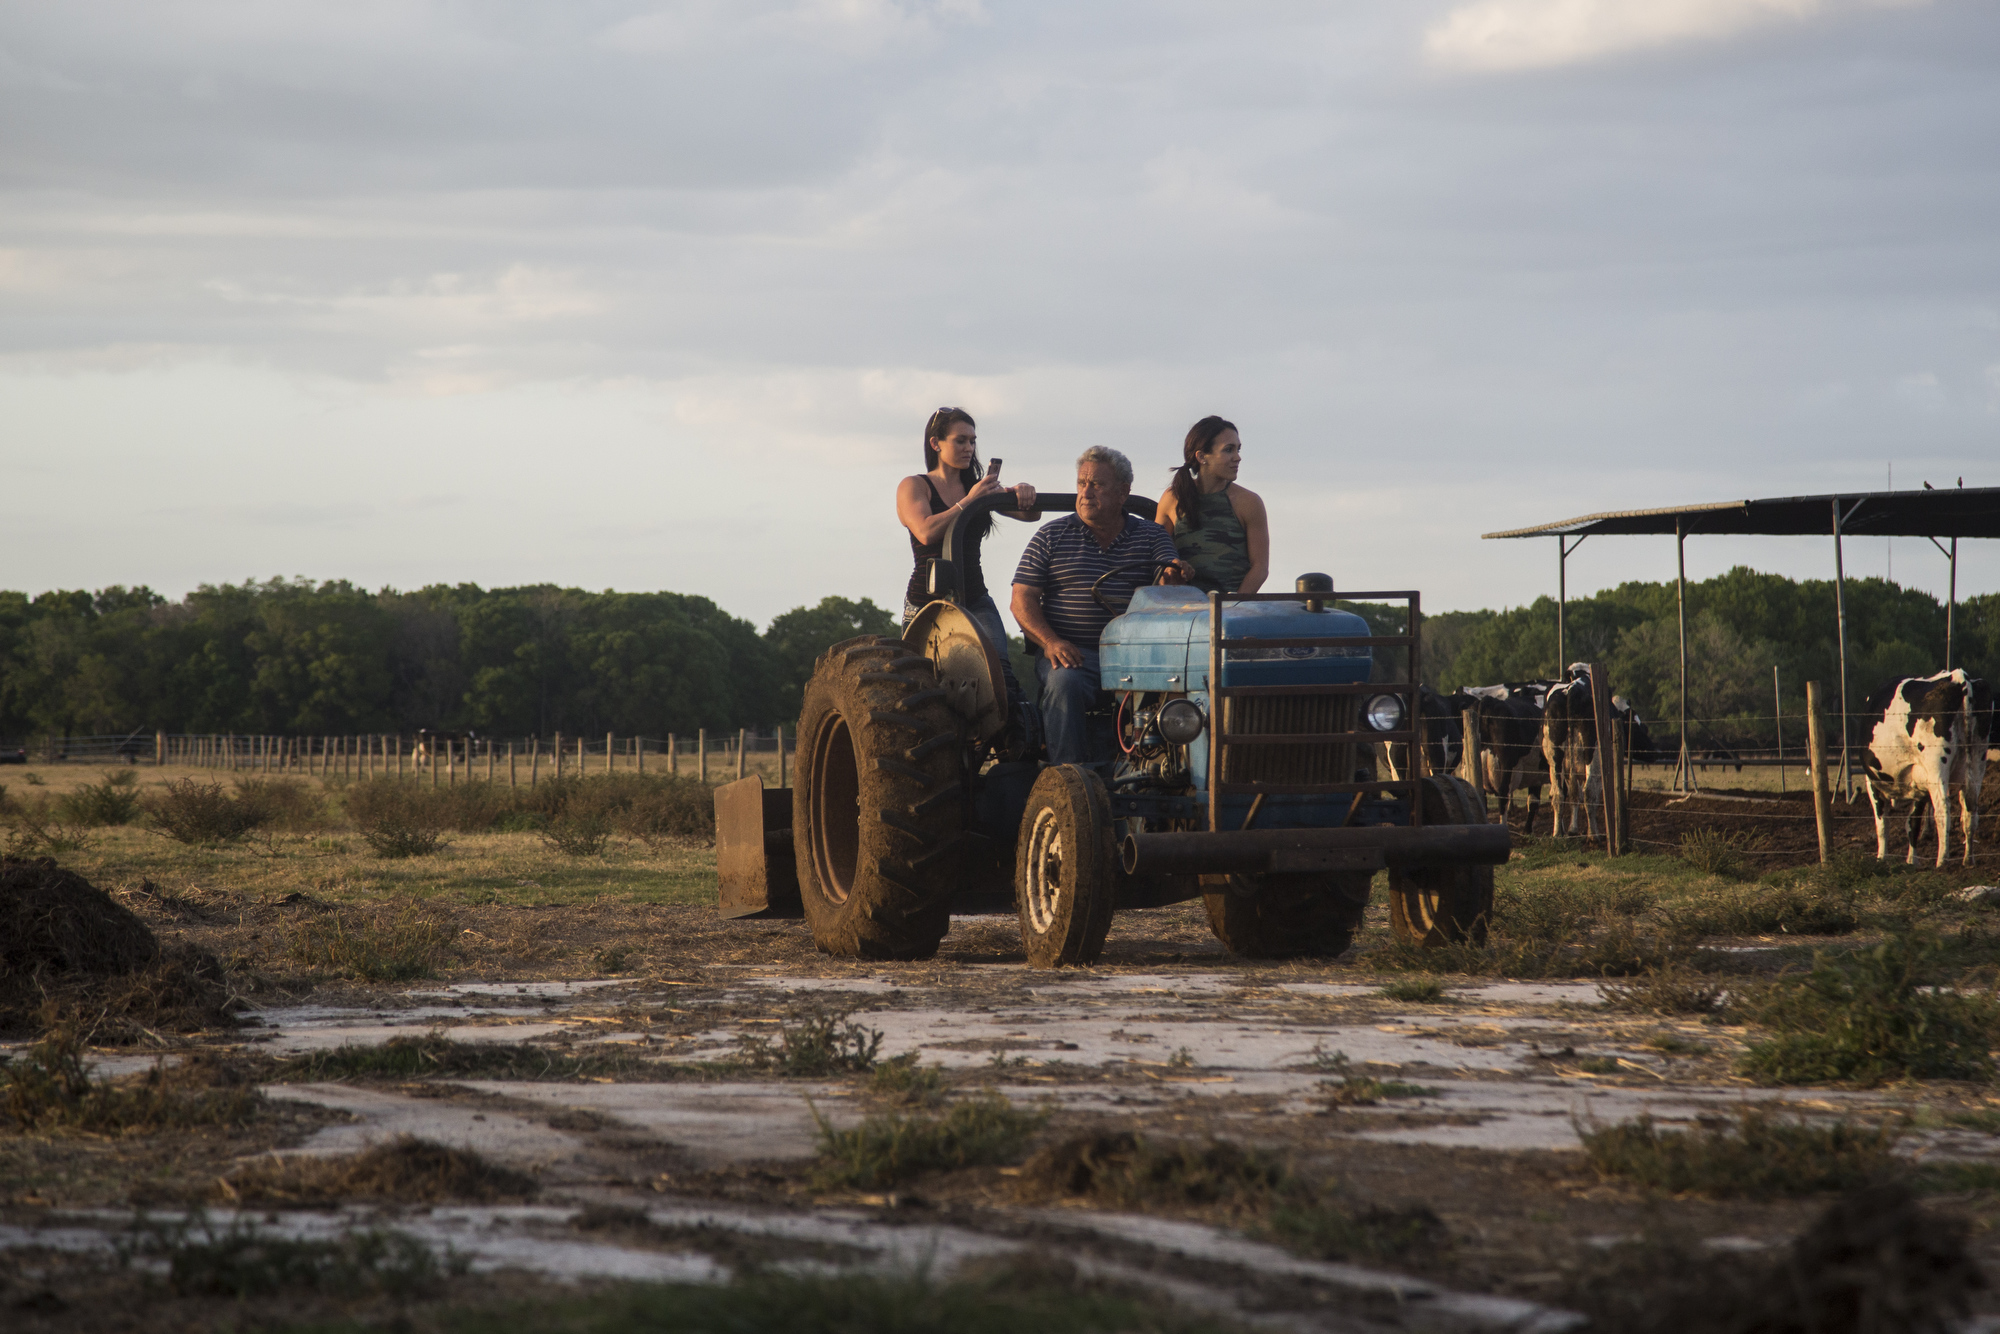  Savannah Busciglio, Sammy Busciglio, and Samantha Busciglio-Payne ride on a tractor back to the barn at Tower Dairy, after taking a family portrait on March 26, 2017. Savannah and Samantha are Sammy's daughters.&nbsp;  "I wish there was some way we 